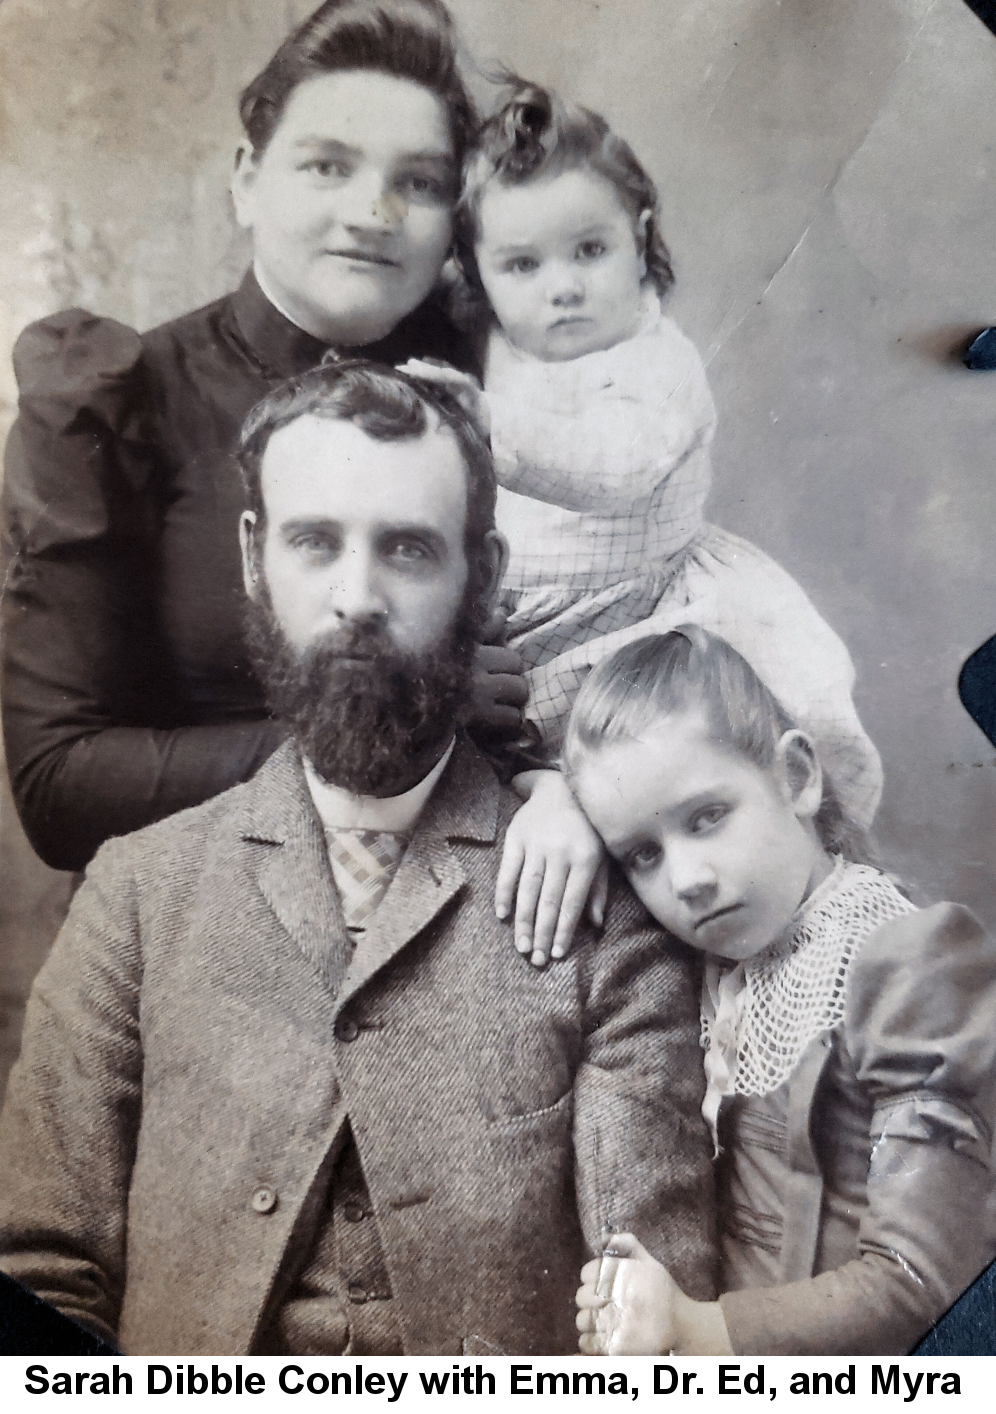 IMAGE/PHOTO: Sarah Dibble conley with daughter Emma, husband Dr. Ed, and daughter Myra: Black and white photo Sarah Dibble Conley, holding toddler Emma, standing behind a seated Dr. Ed, on whom is leaning Myra Conley with a sad expression.